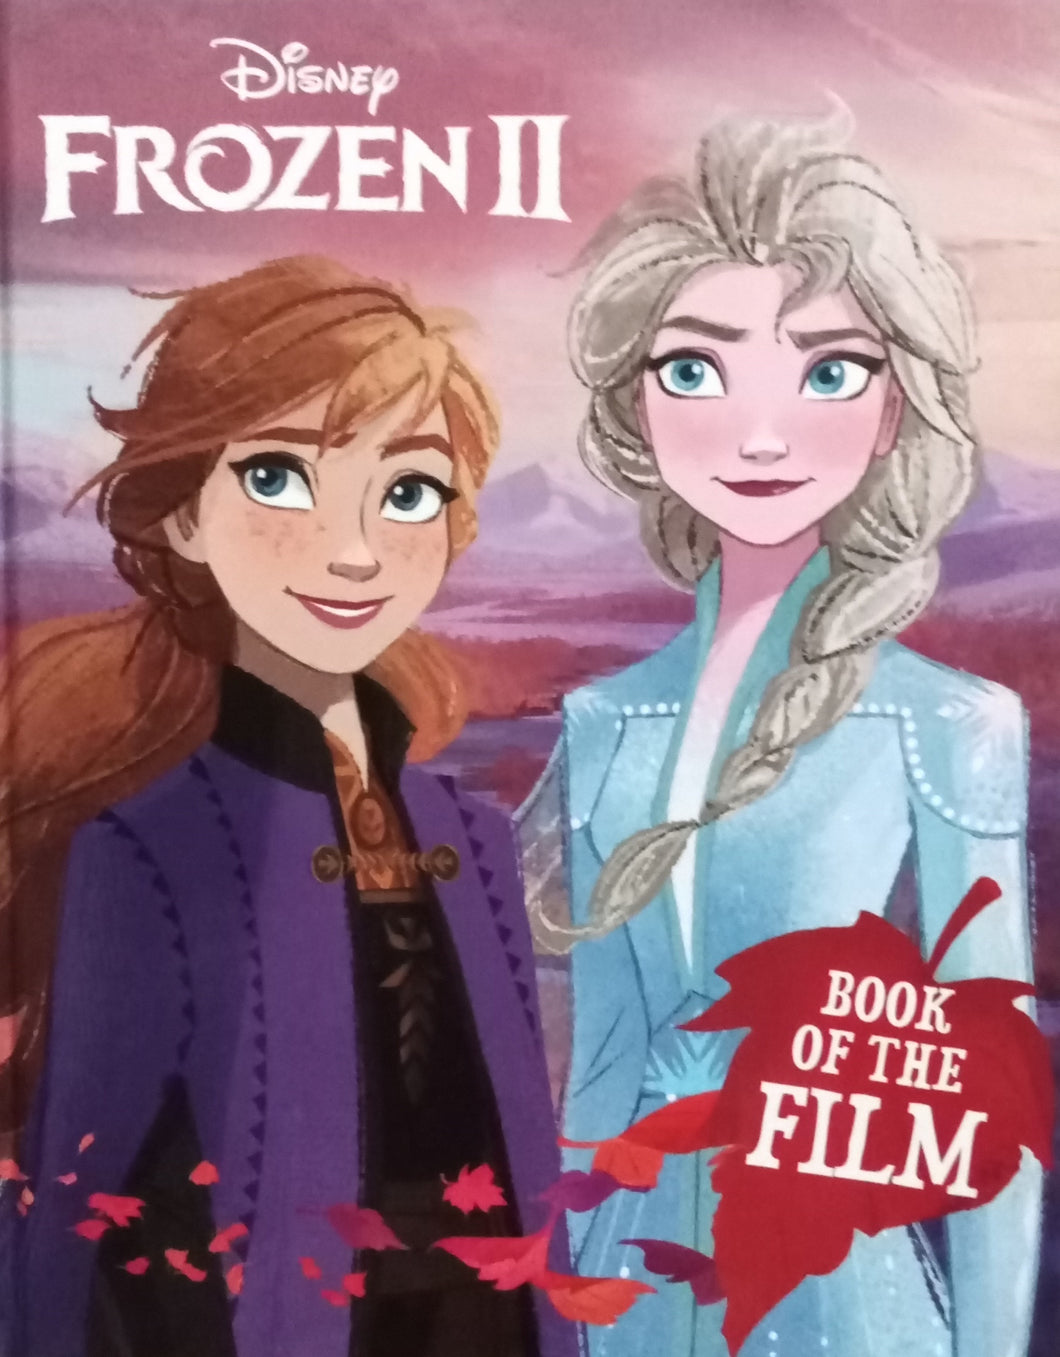 Frozen 2 Book Of The Film WS - Books for Less Online Bookstore